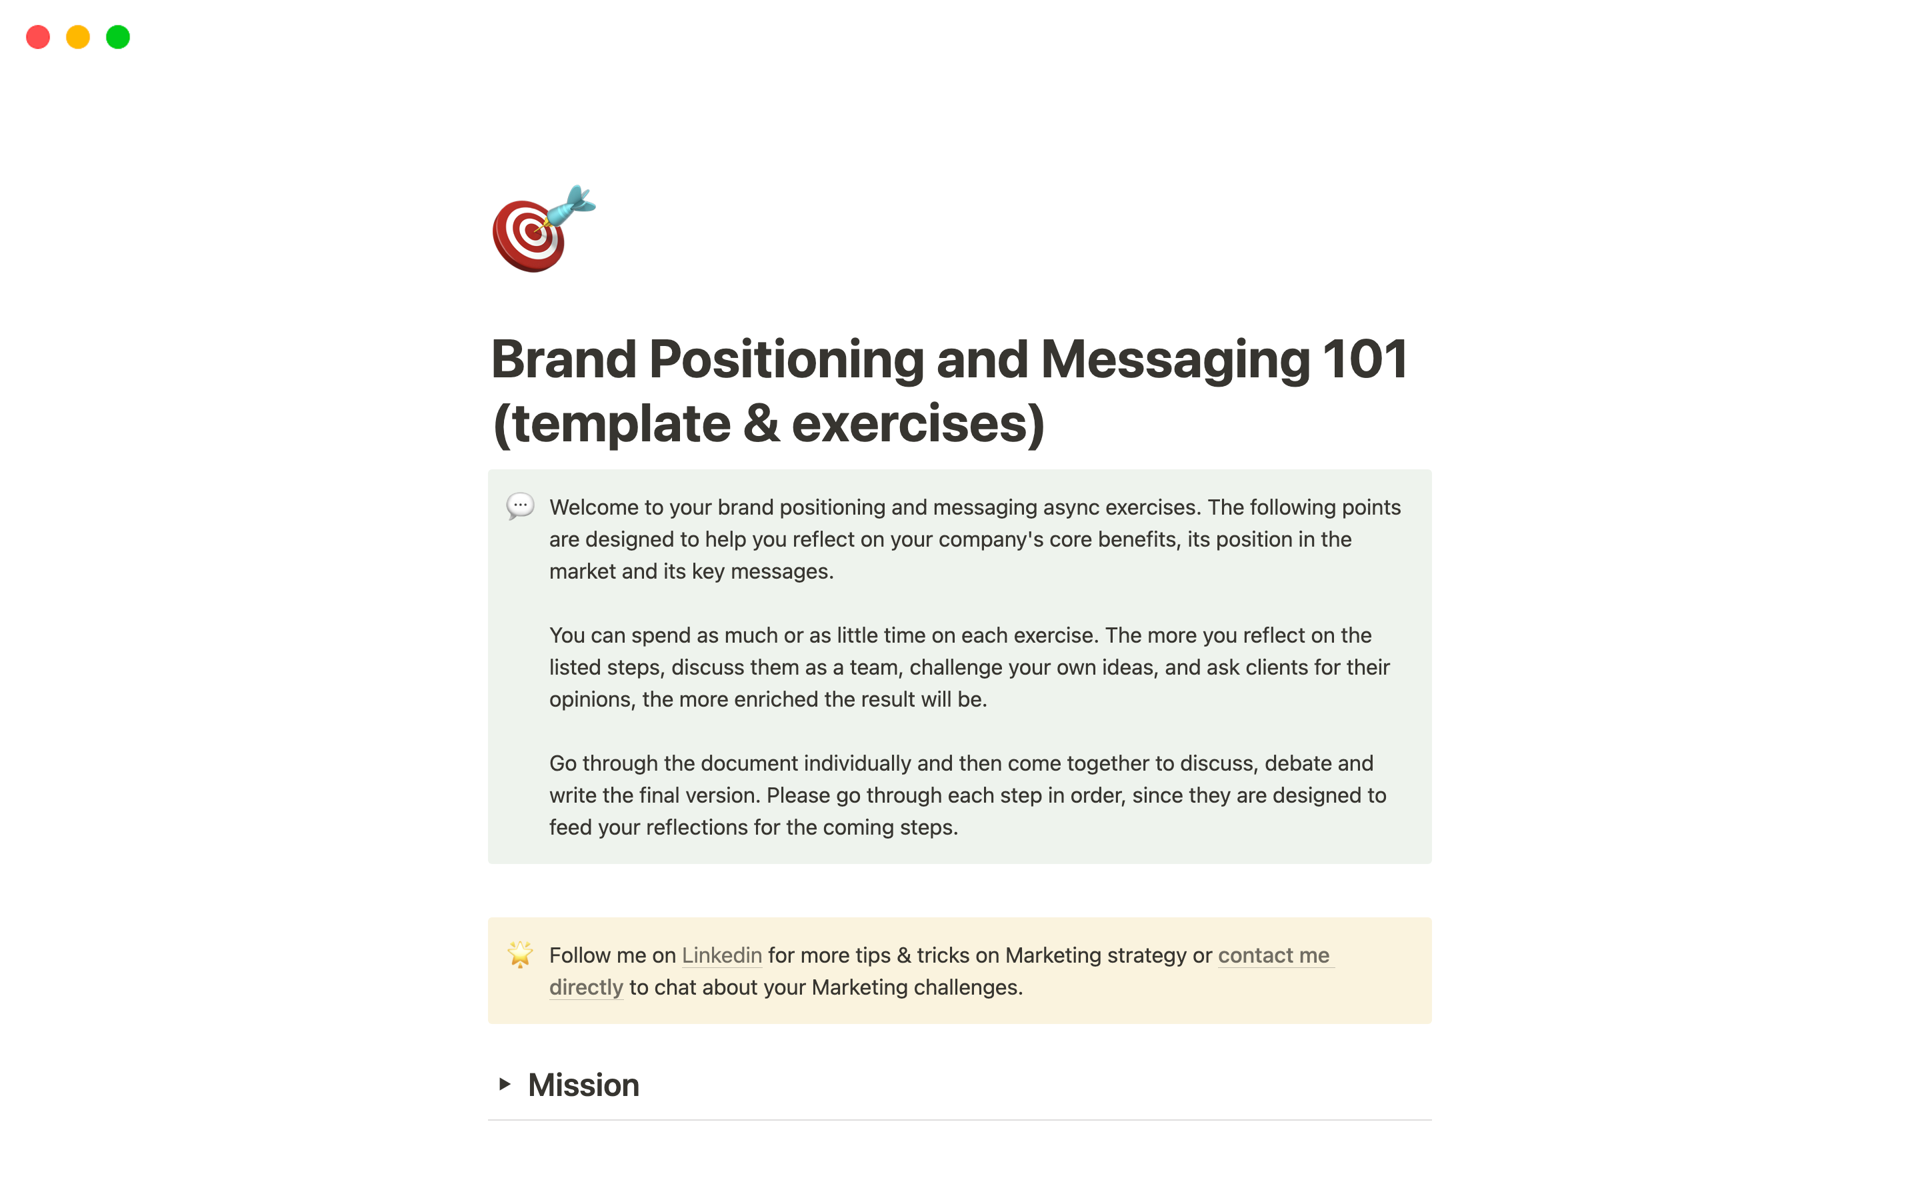 brand-positioning-and-messaging-101-template-exercises-the-letter-em-desktop